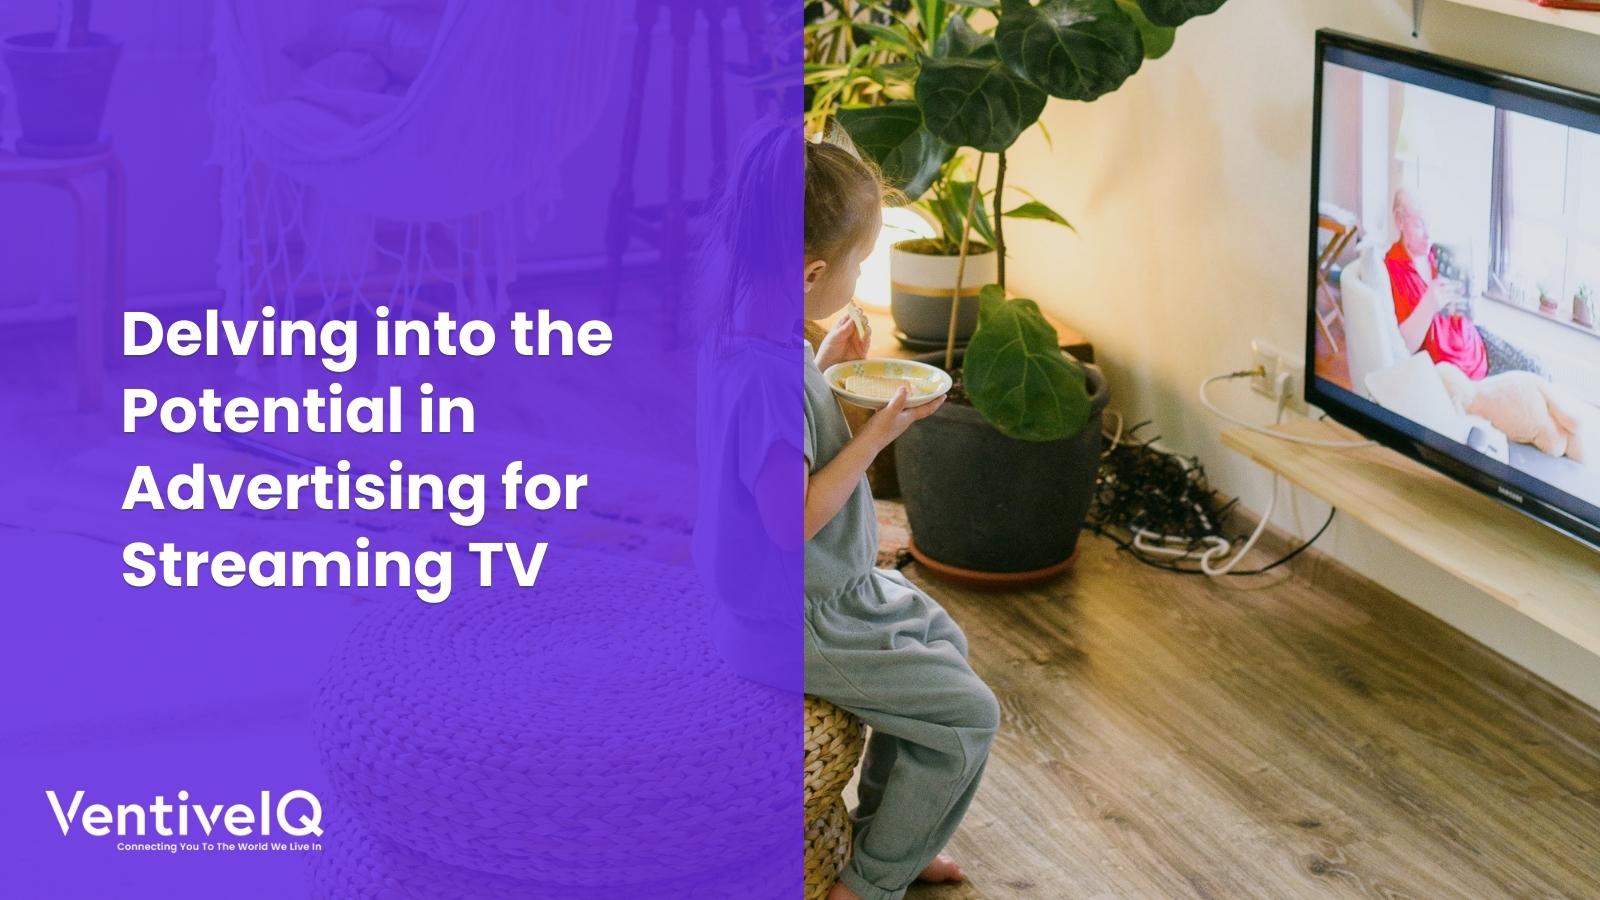 Delving into the Potential in Advertising for Streaming TV